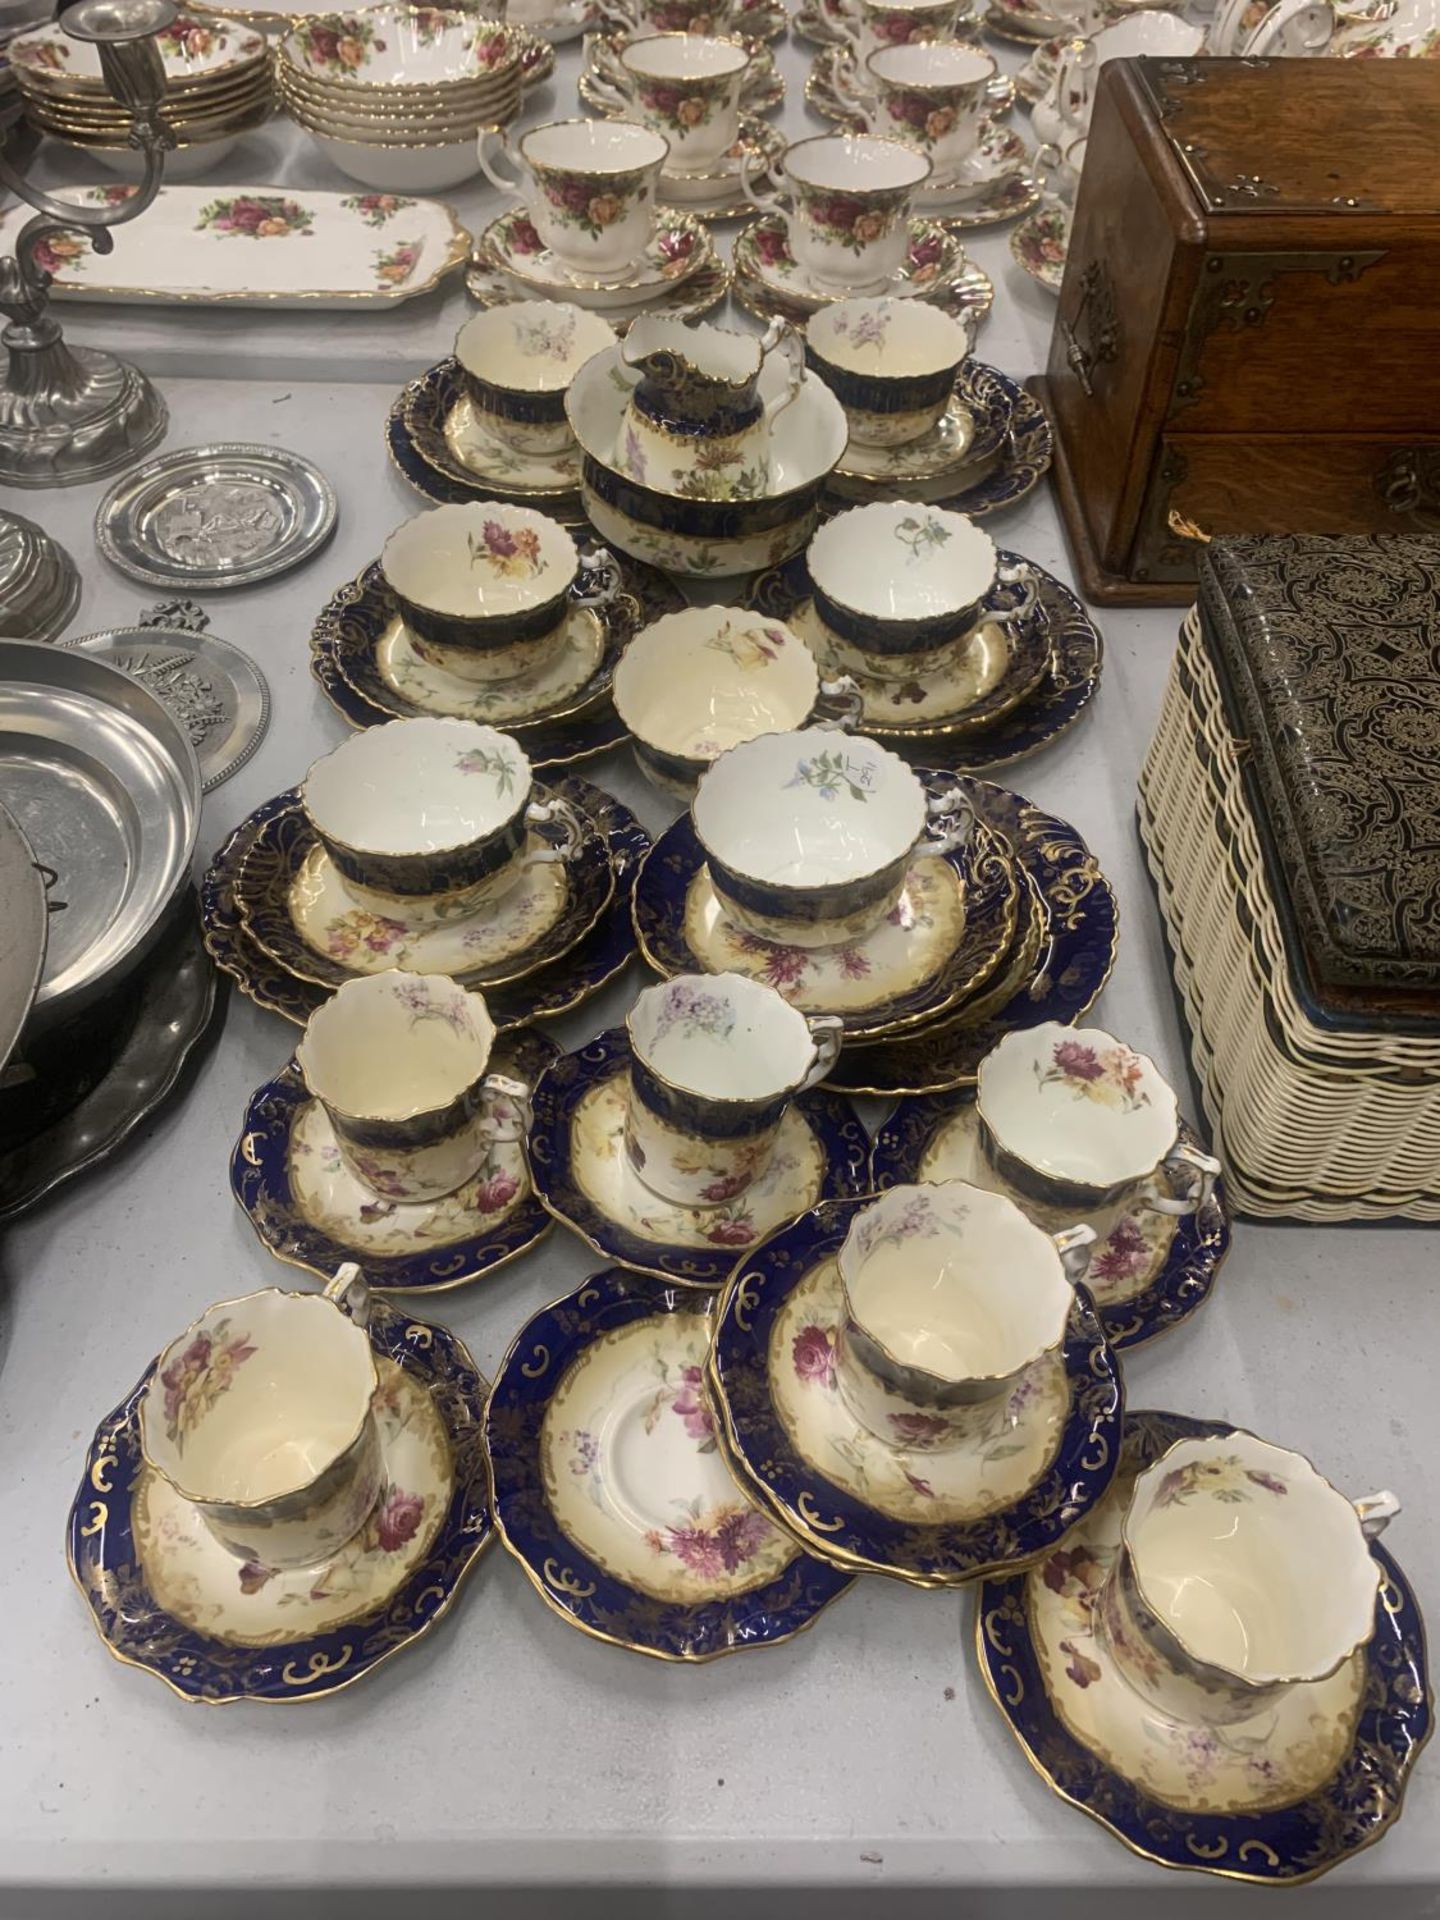 AN ANTIQUE CHINA TEASET TO INCLUDE A SUGAR BOWL, CREAM JUG, CUPS, SAUCERS, AND SIDE PLATES